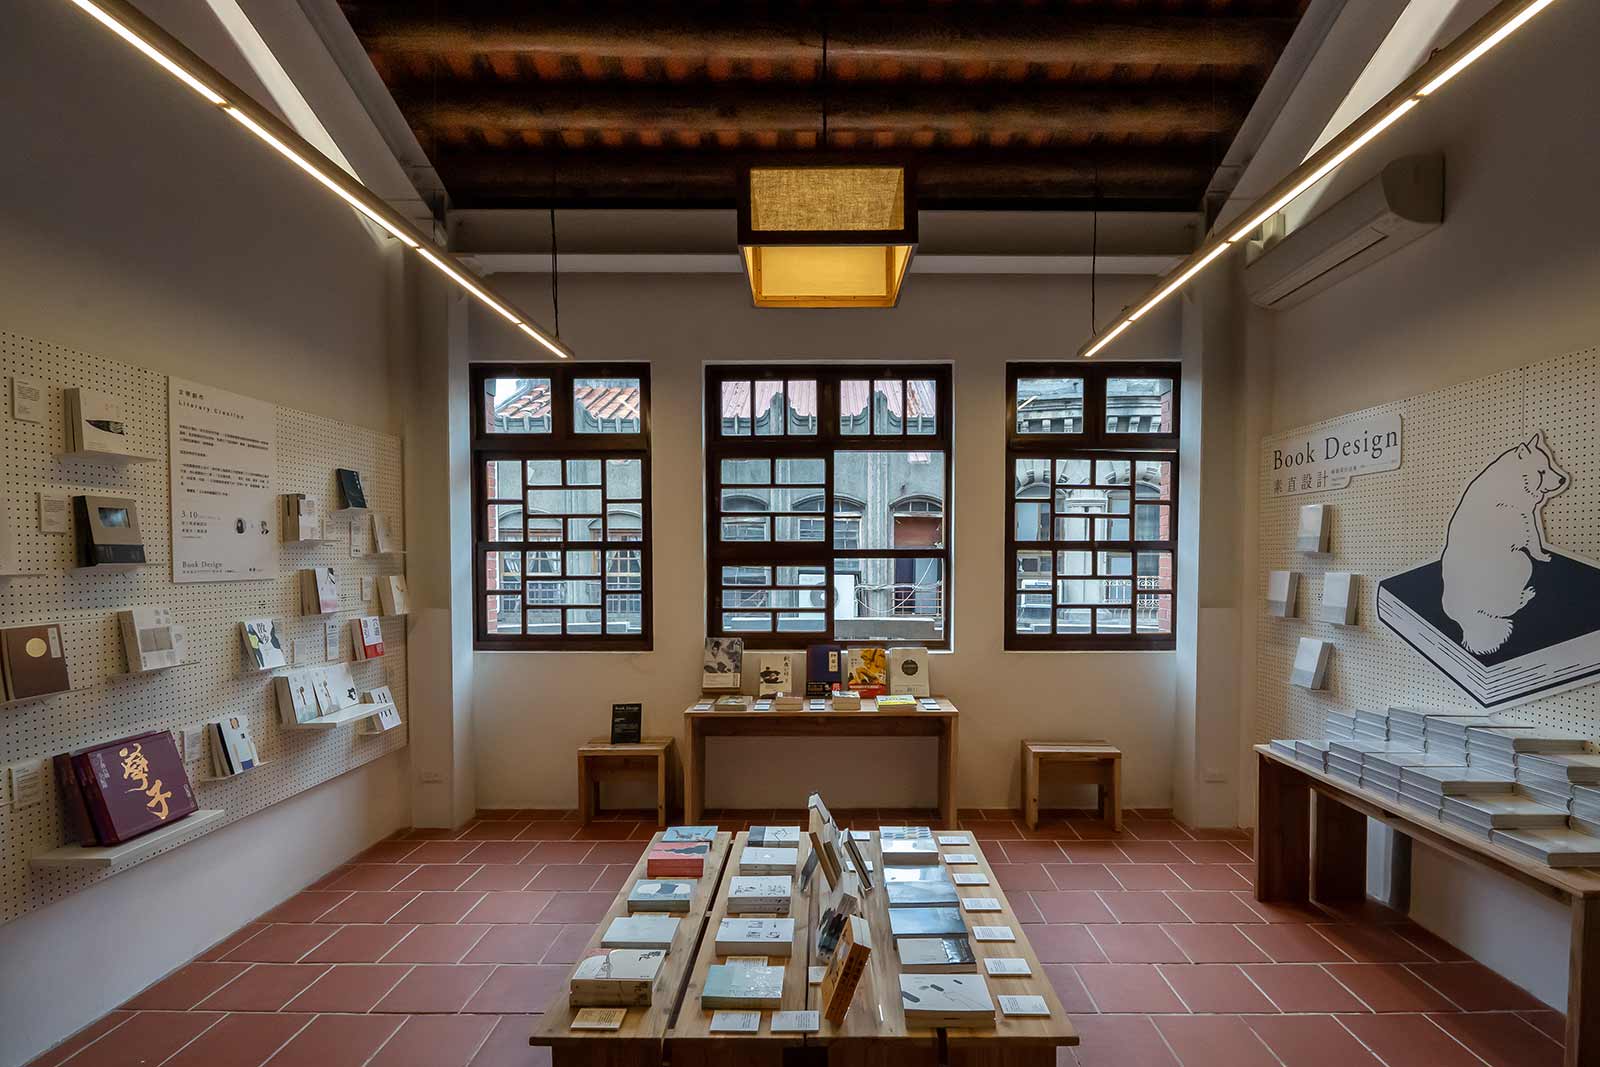 Books on display in an open space on the second floor of a renovated old home.